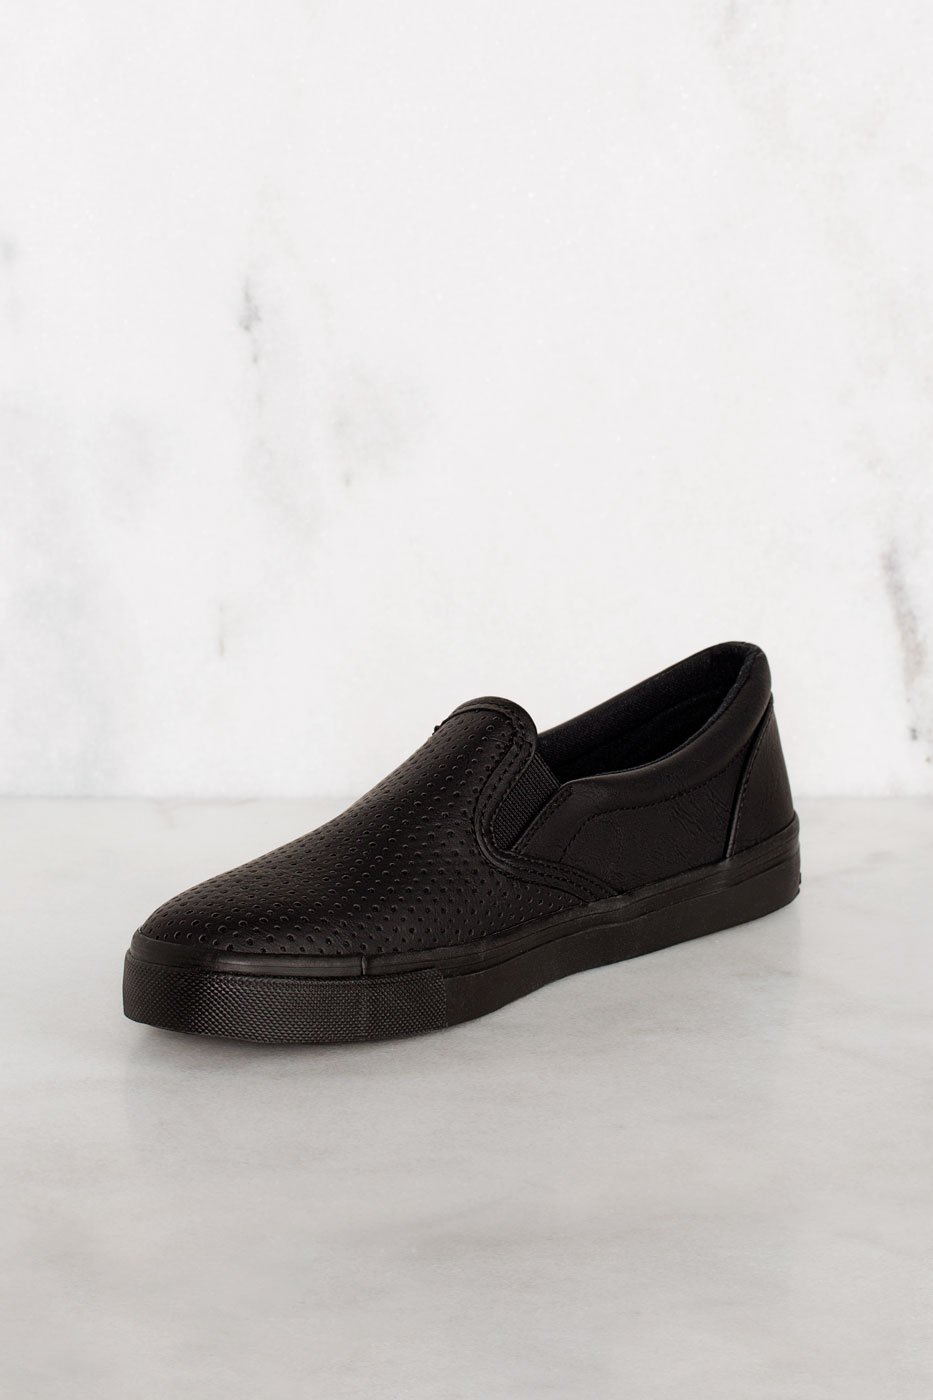 Shoes - Second Nature Slip-On Sneakers - All Black